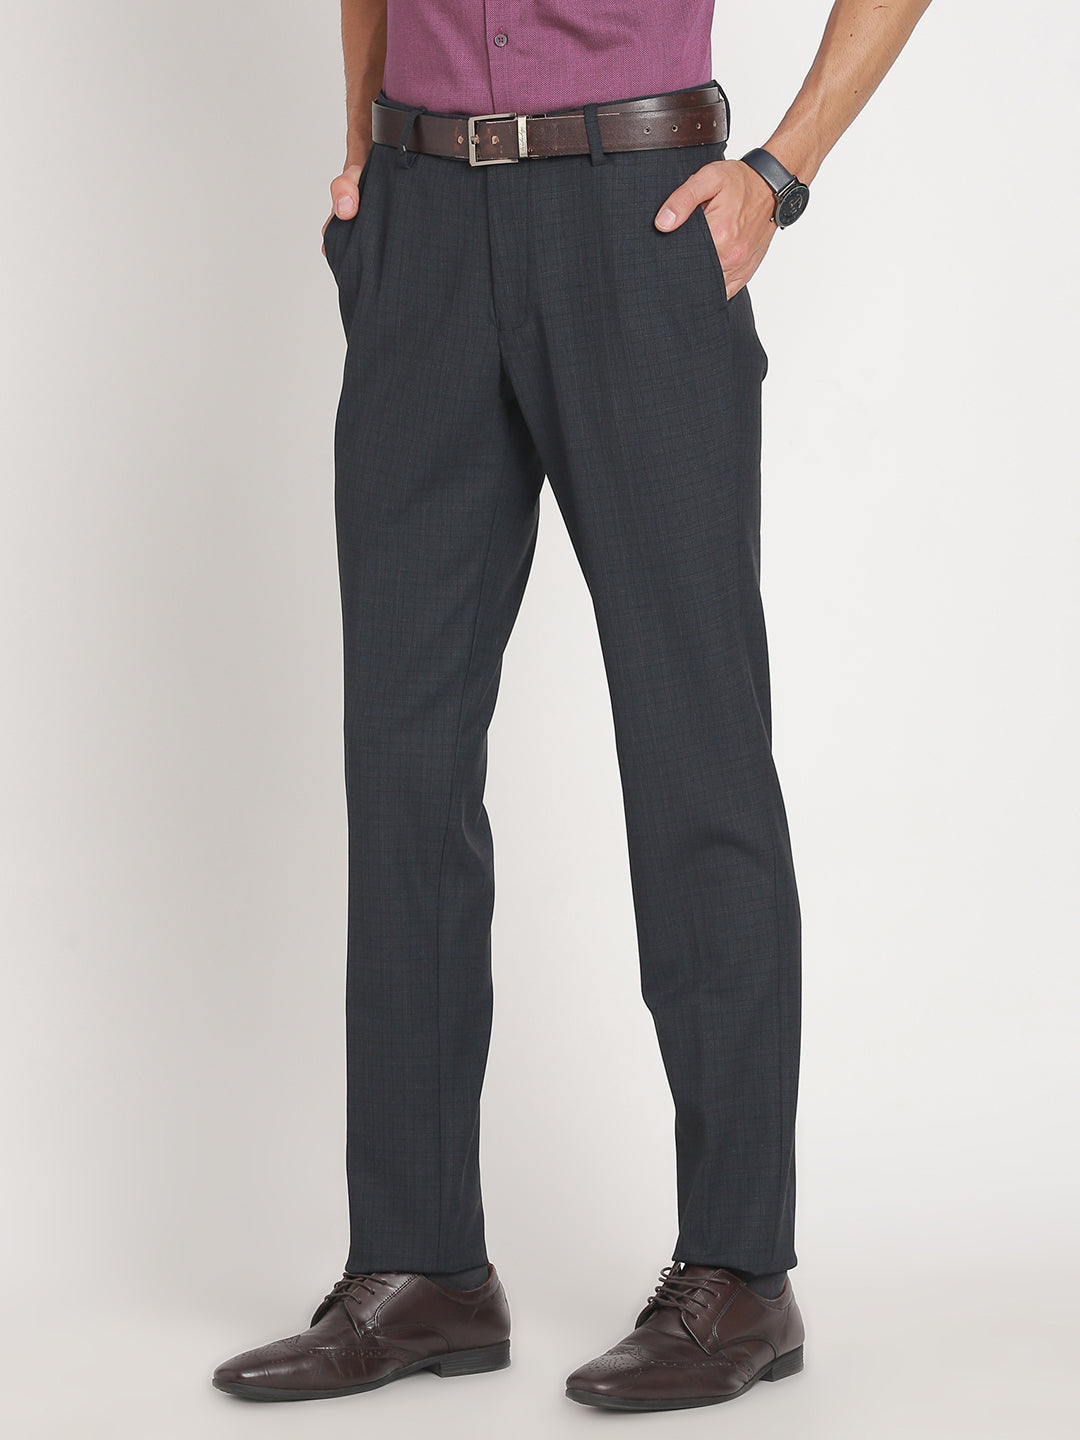 Cotton Stretch Charcoal Checkered Ultra Slim Fit Flat Front Formal Trouser